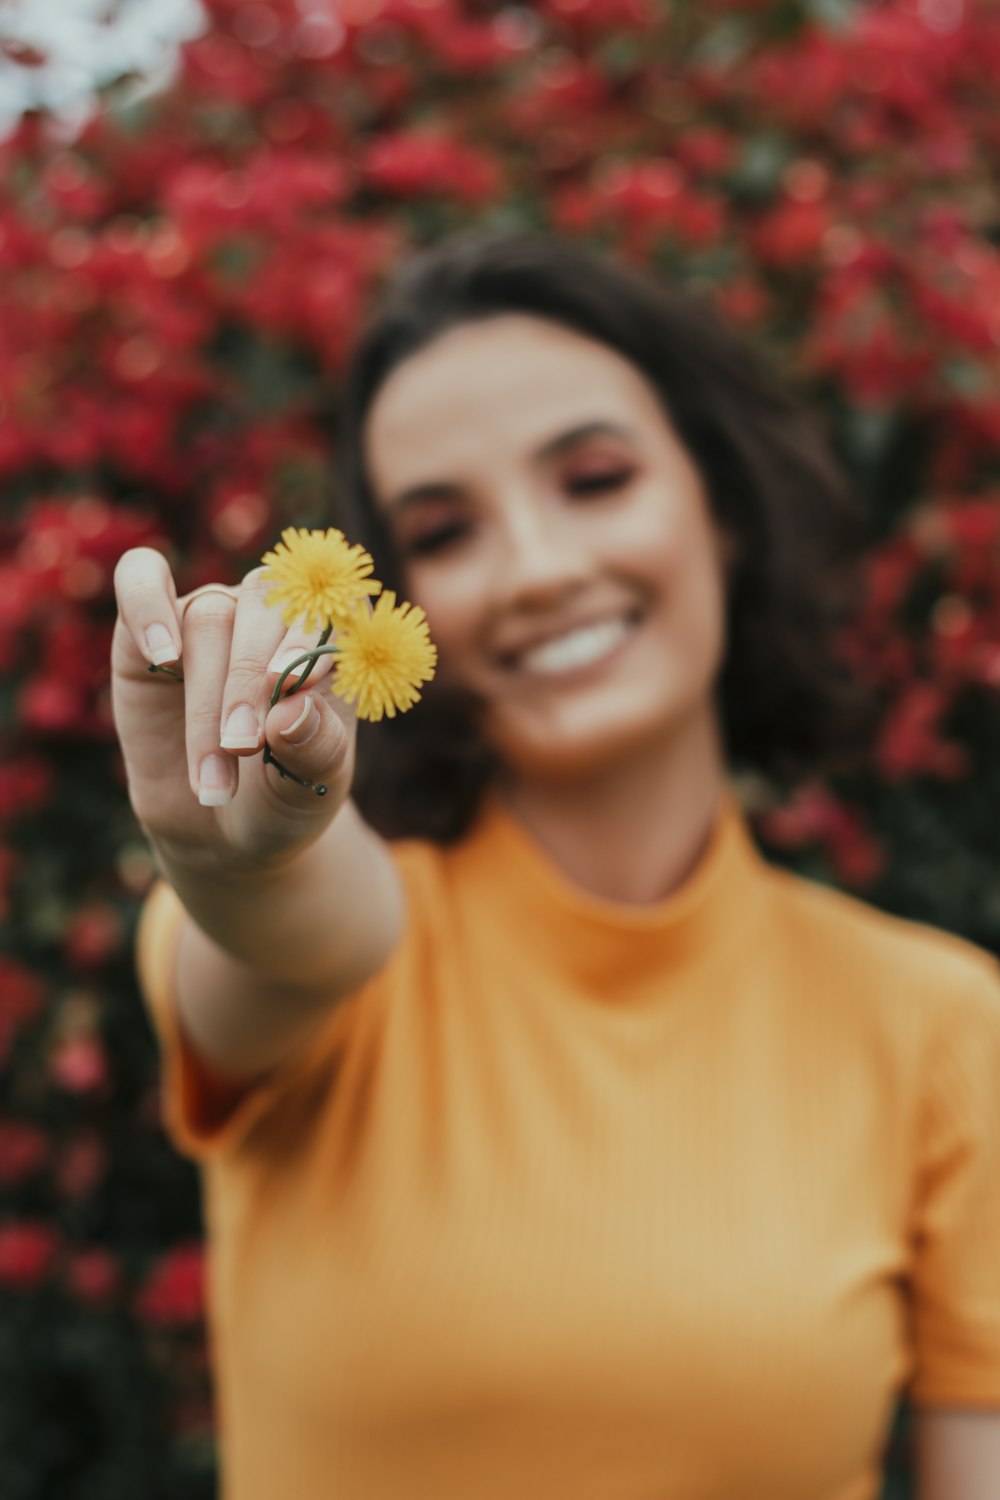 a woman in a yellow shirt holding a yellow flower